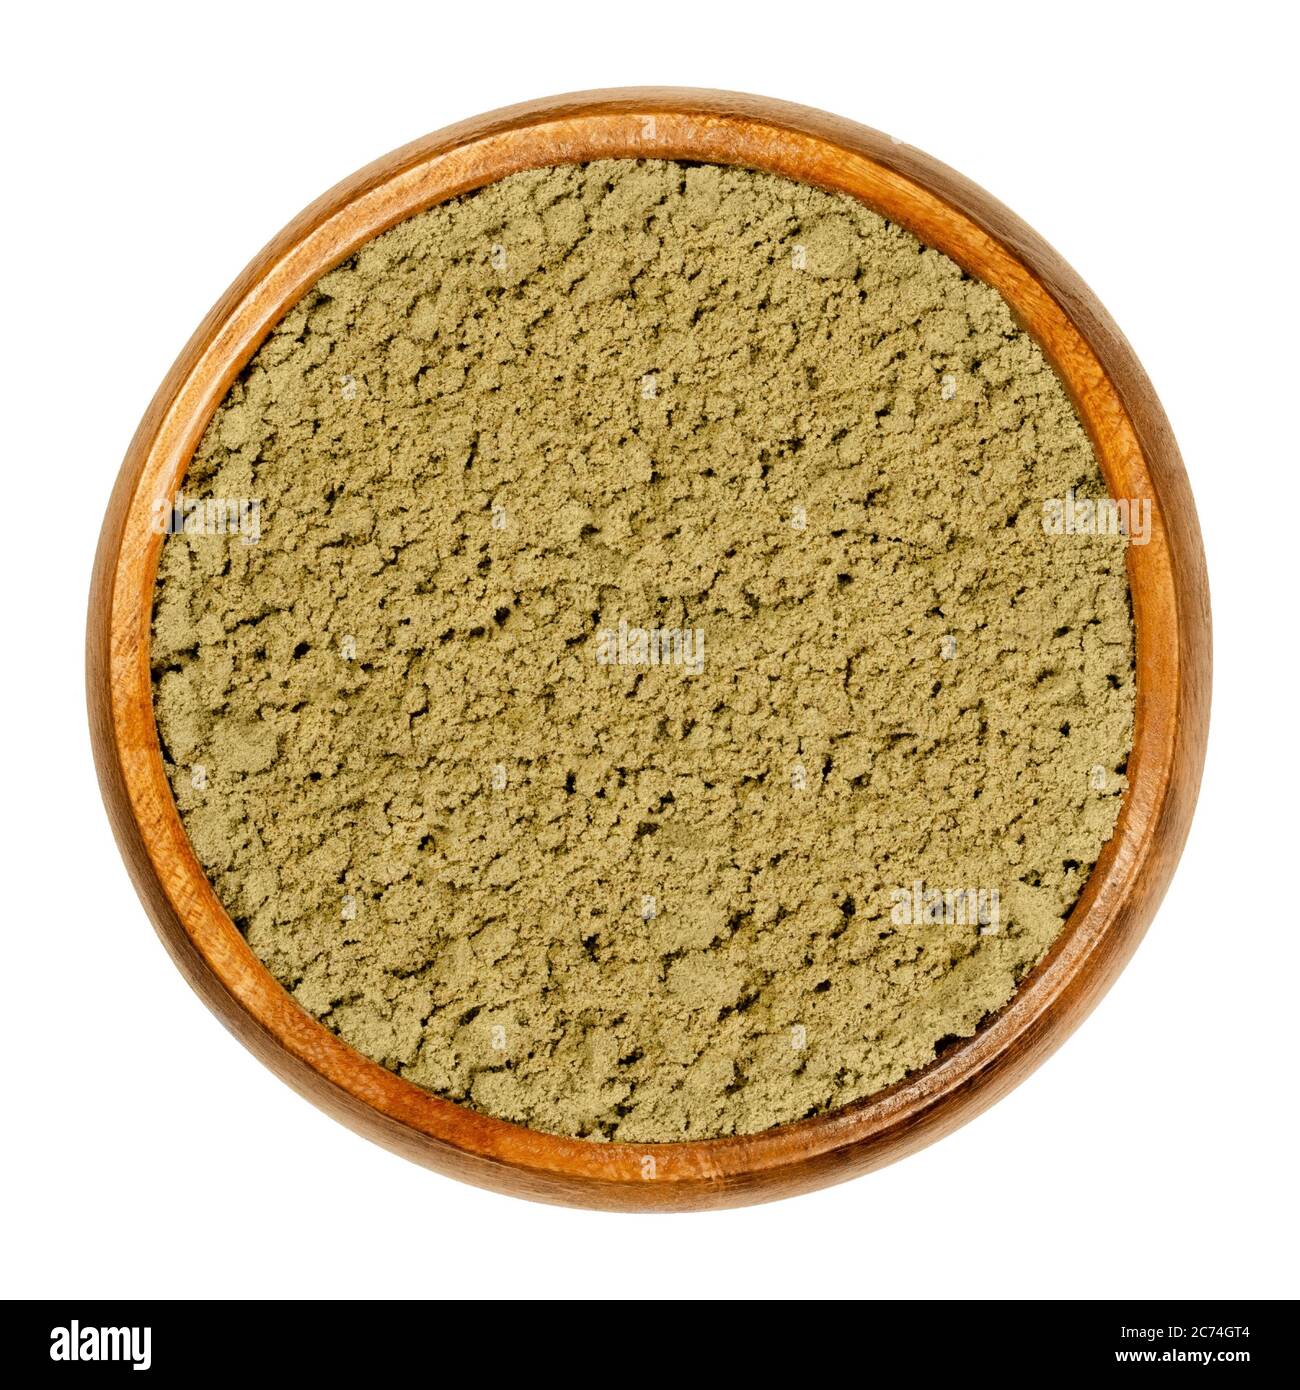 Hemp protein powder in wooden bowl. Ground seeds of Cannabis sativa. Gluten free dietary supplement food for athletes. An alternative to whey protein. Stock Photo